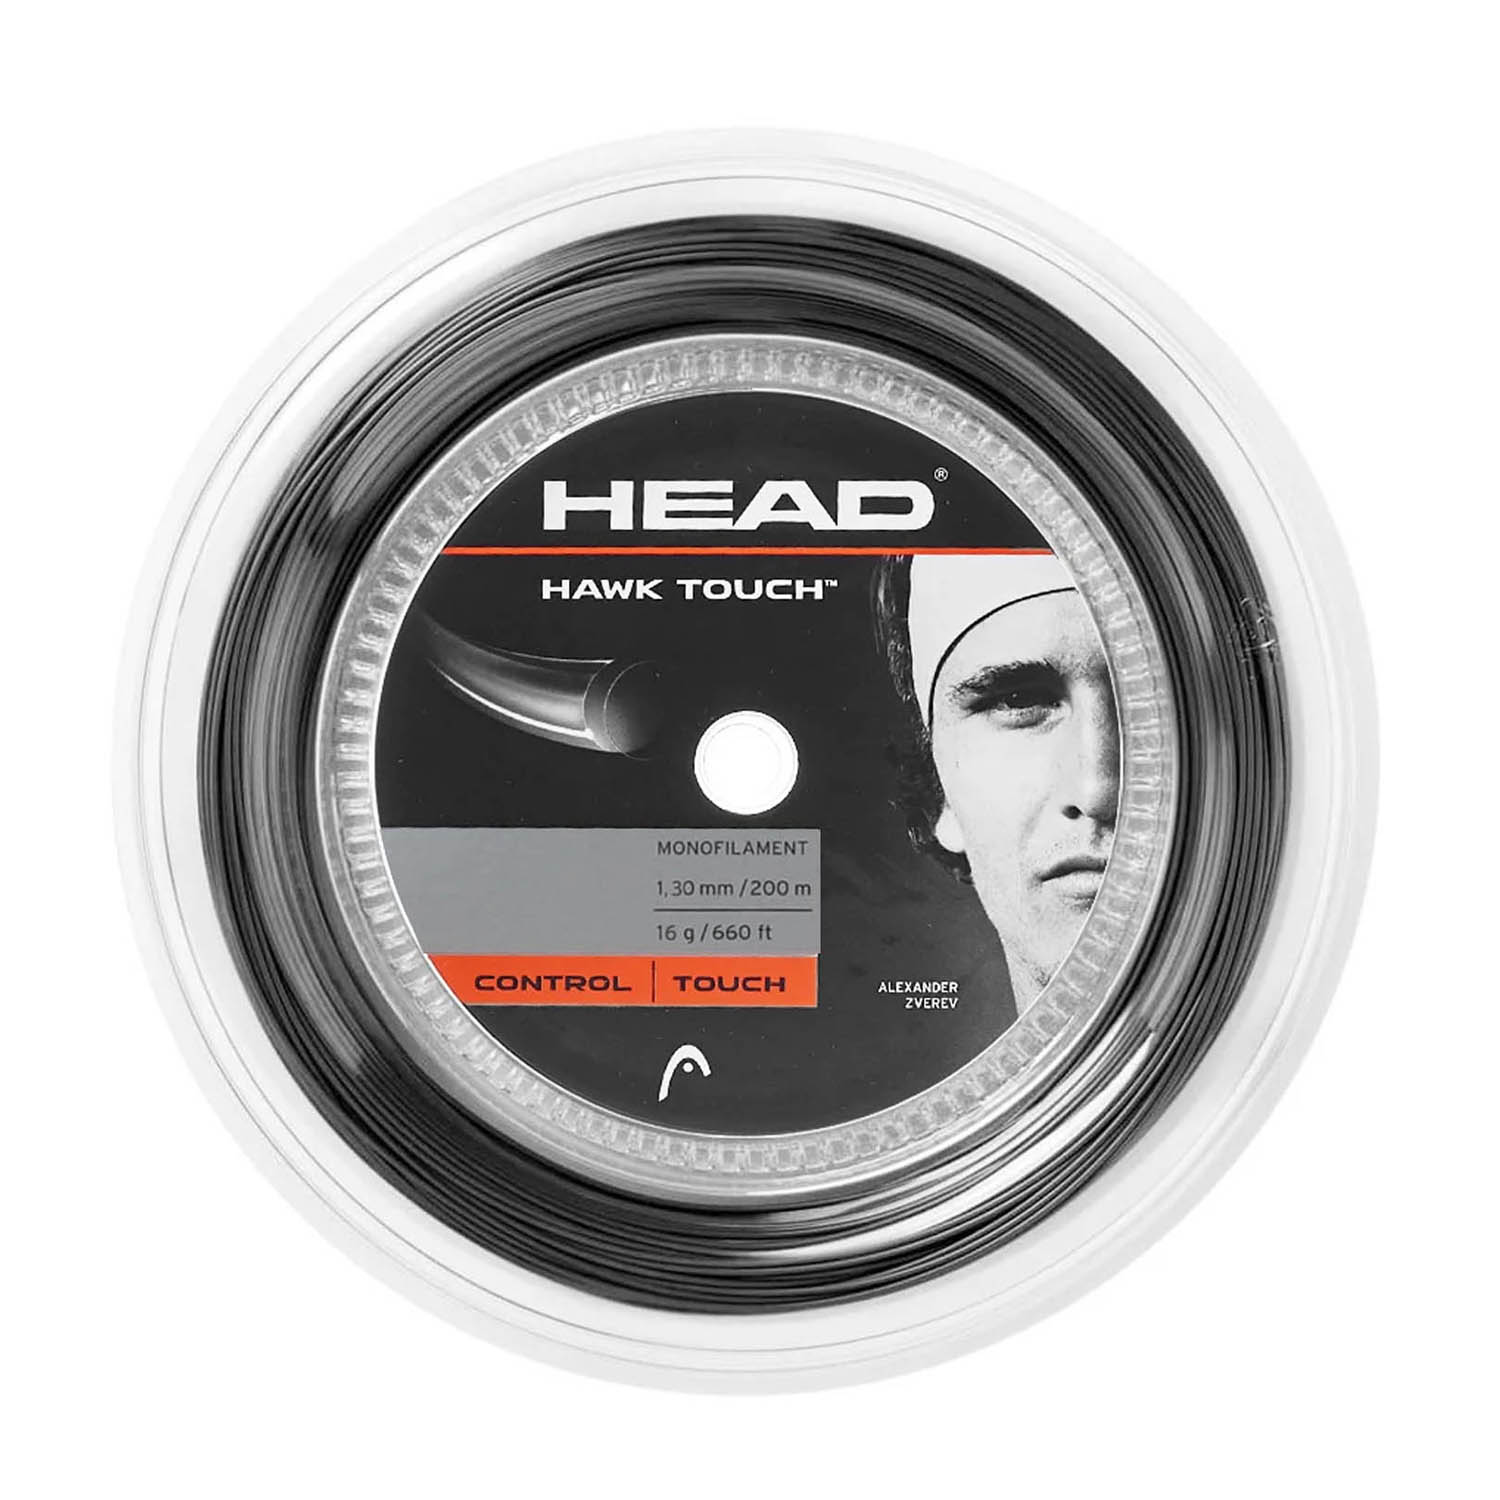 Head Hawk Touch 1.30 120 m Reel - Anthracite